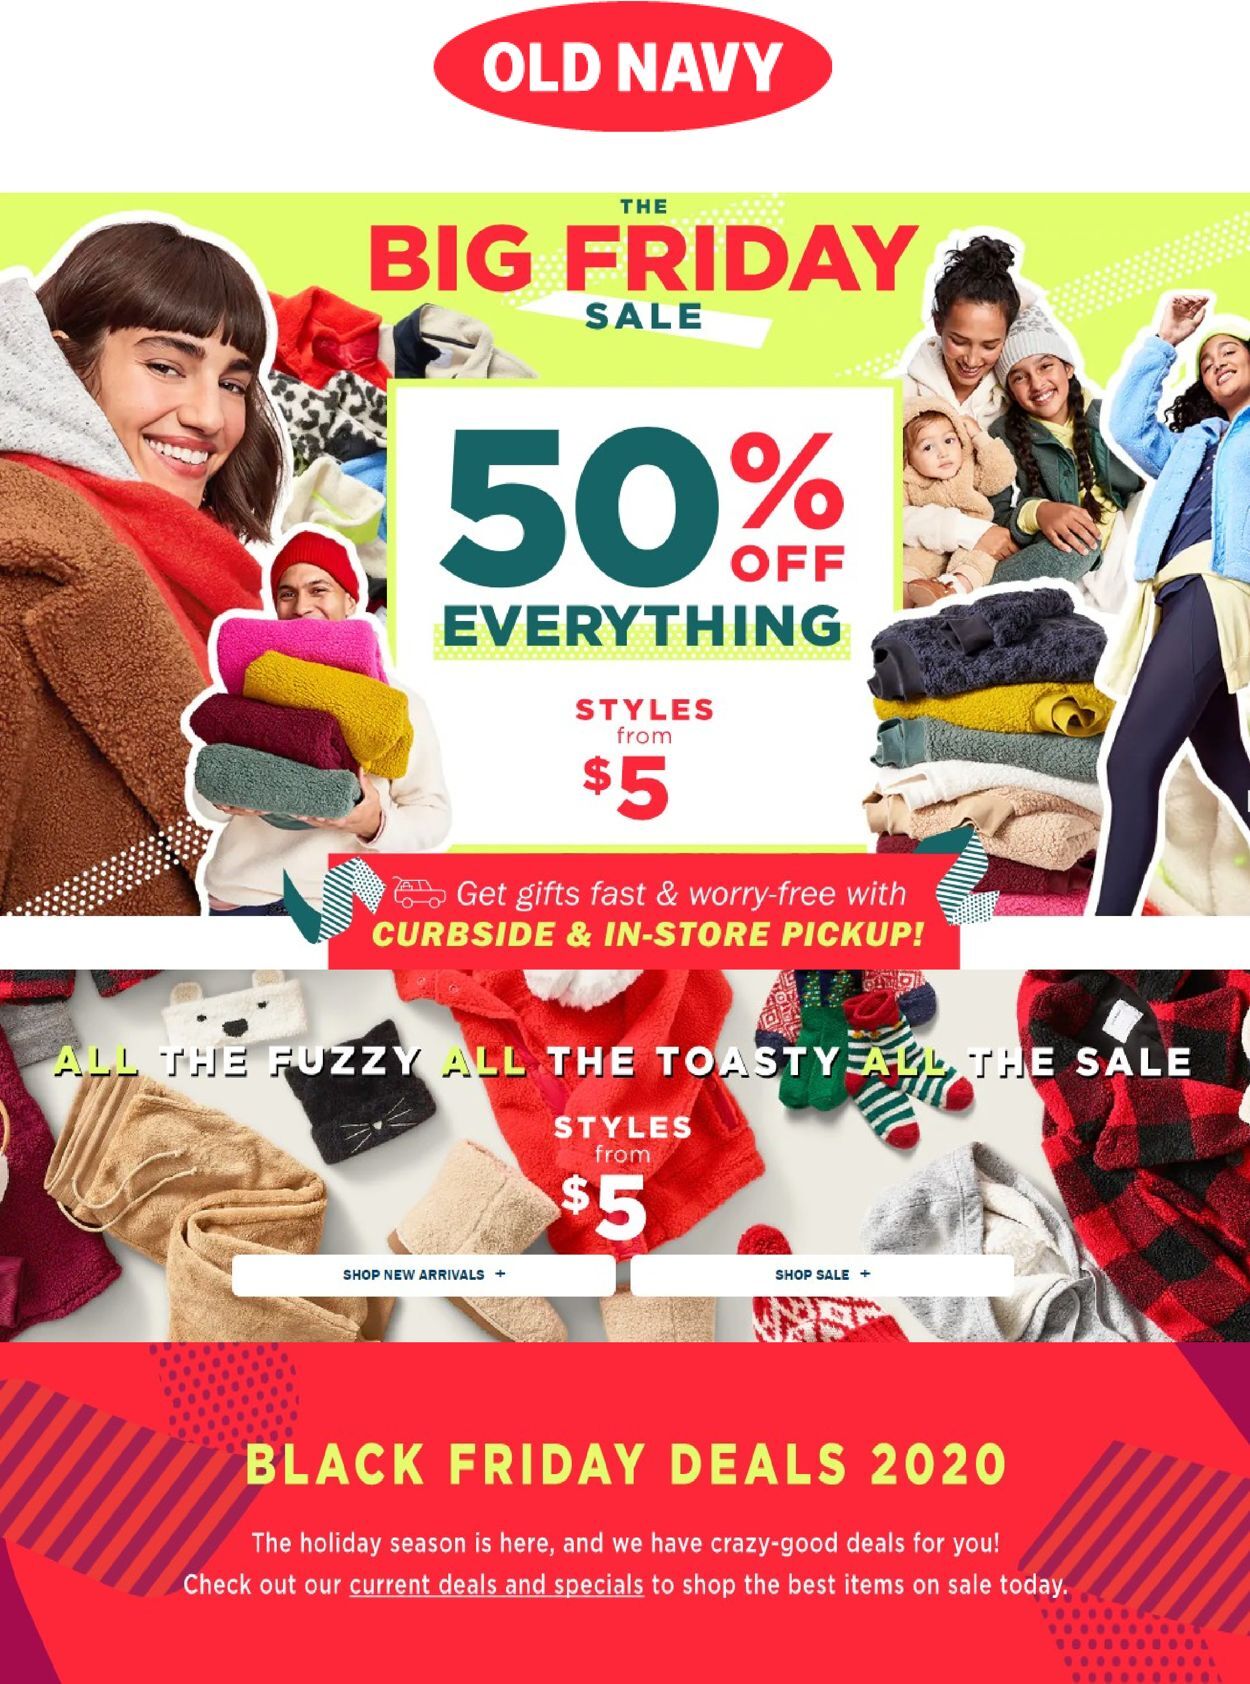 Old Navy Black Friday 2021 Ad - Savings.com - What Is Anthropologie Black Friday 2021 Deals